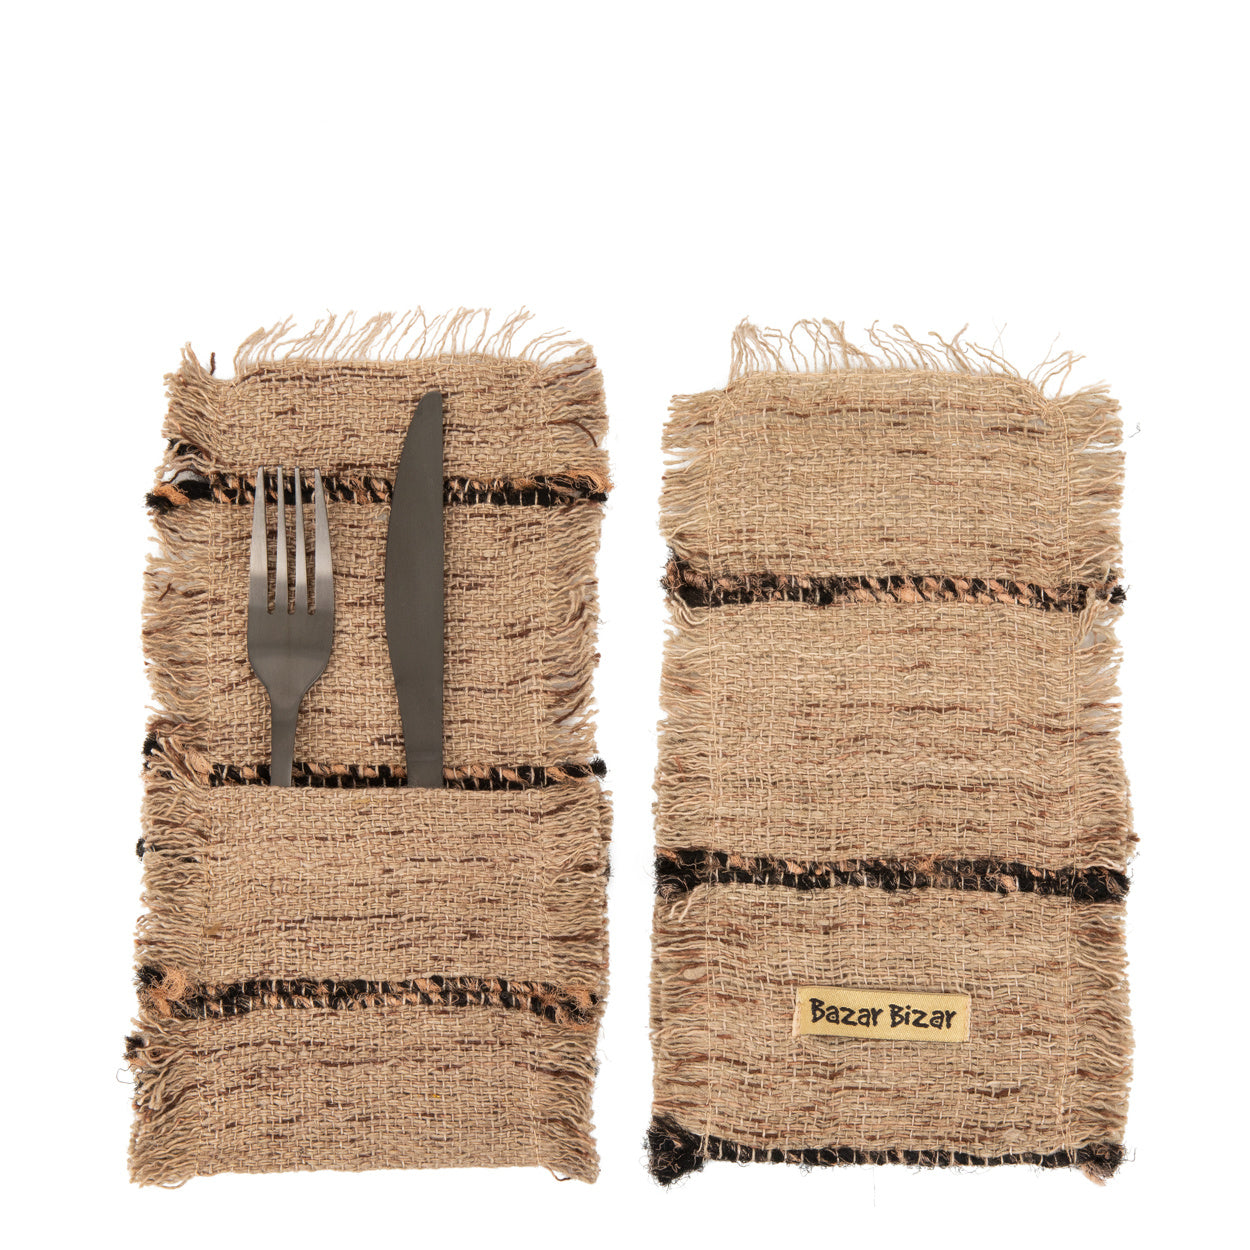 THE OH MY GEE Cutlery Holder Set of 4 beige black